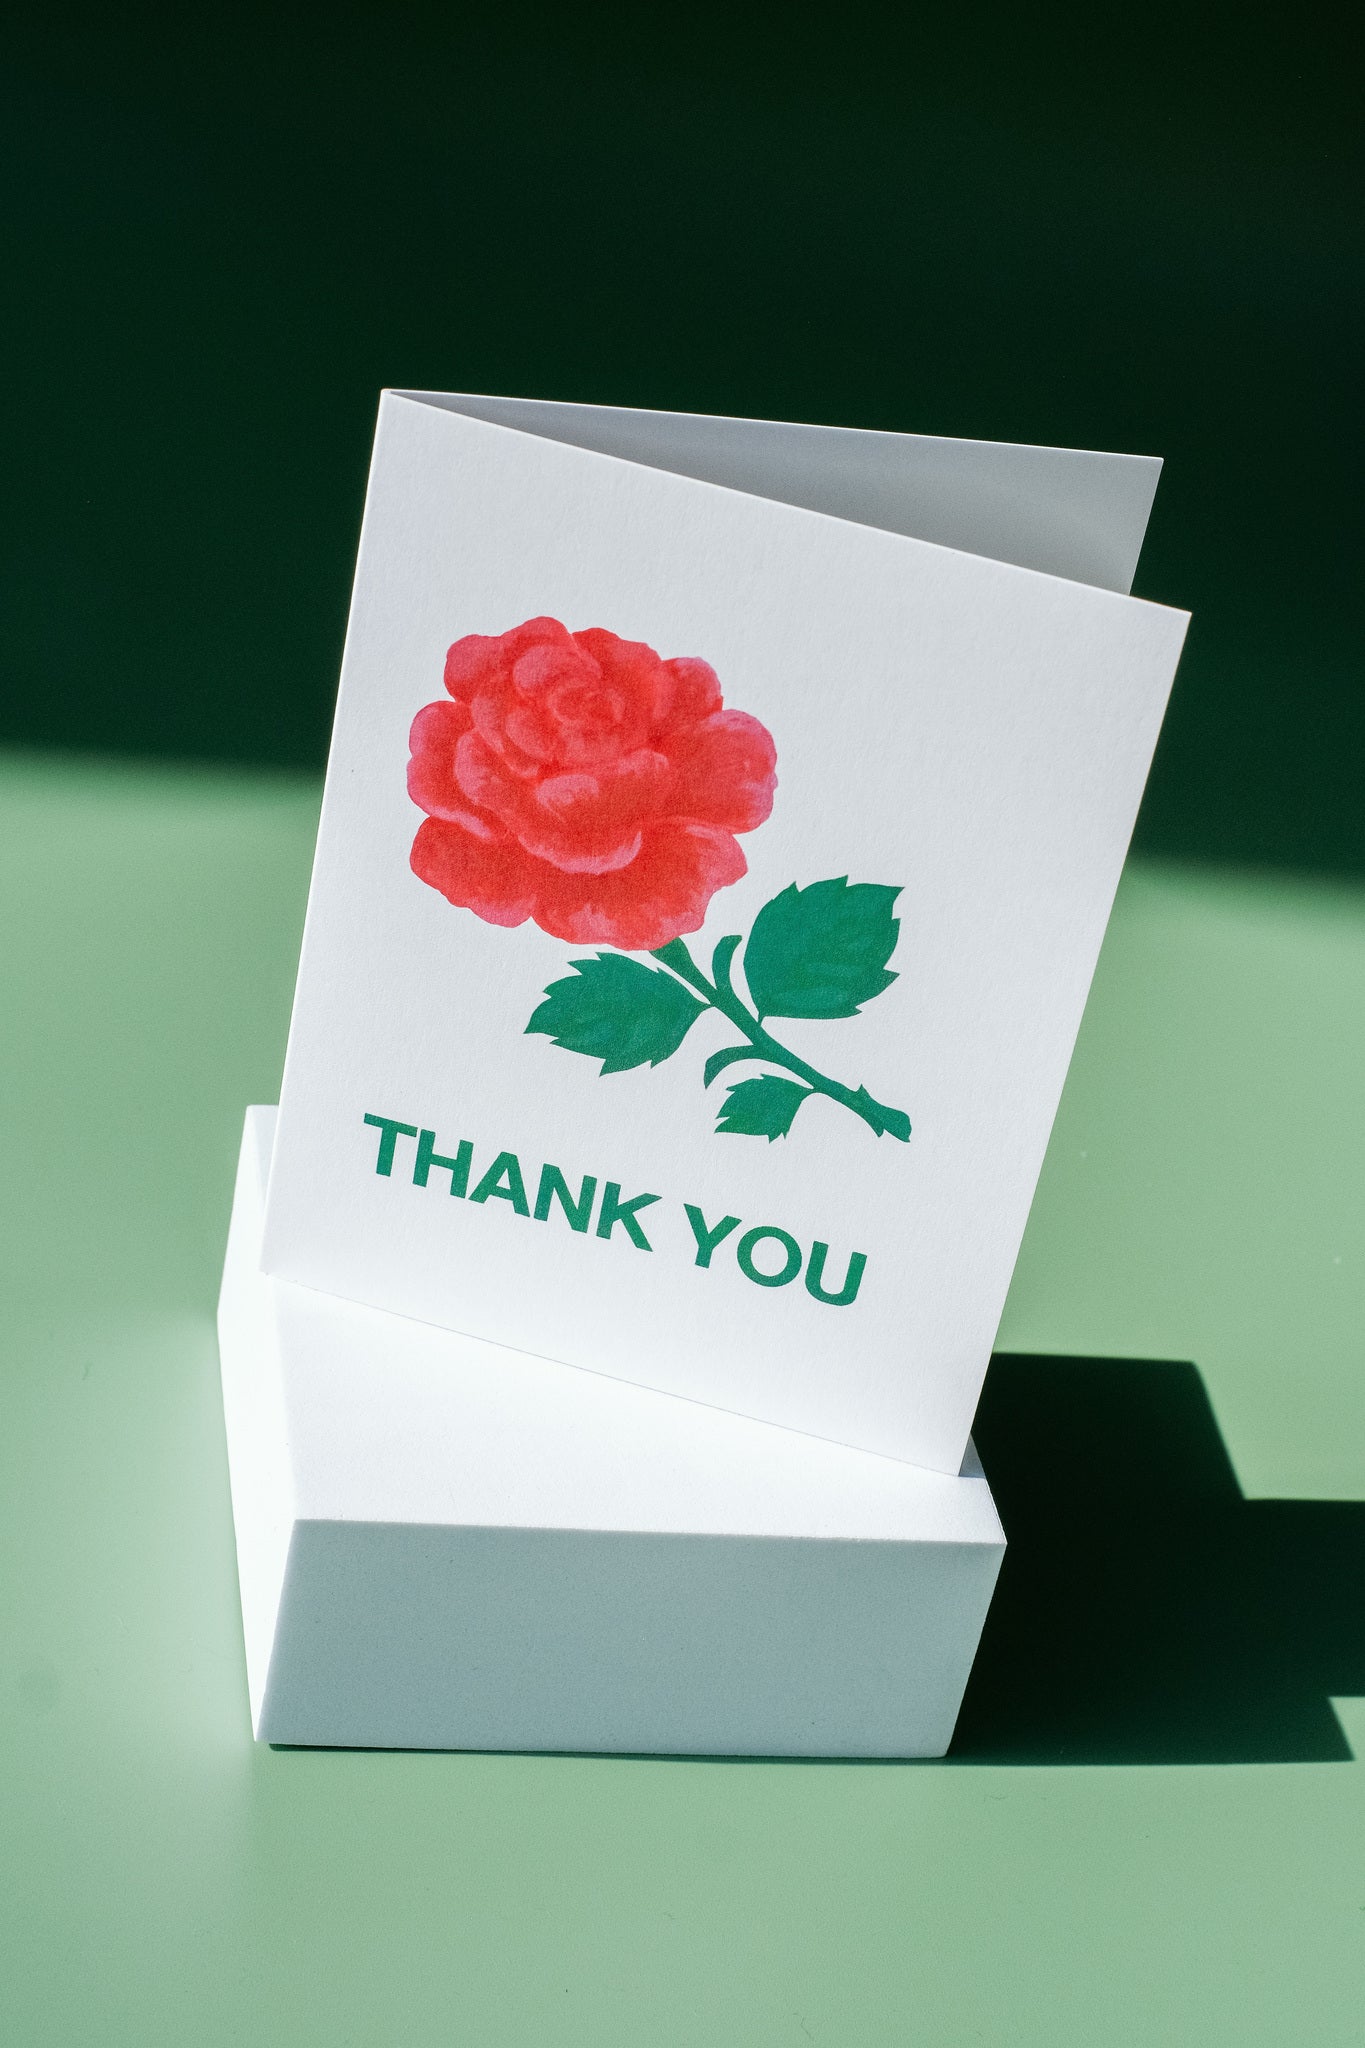 Cream colored background featuring a big red rose with a green stem and leaves, below it is written in green-colored font "Thank You" printed on cardstock on top of a white block with a green background.